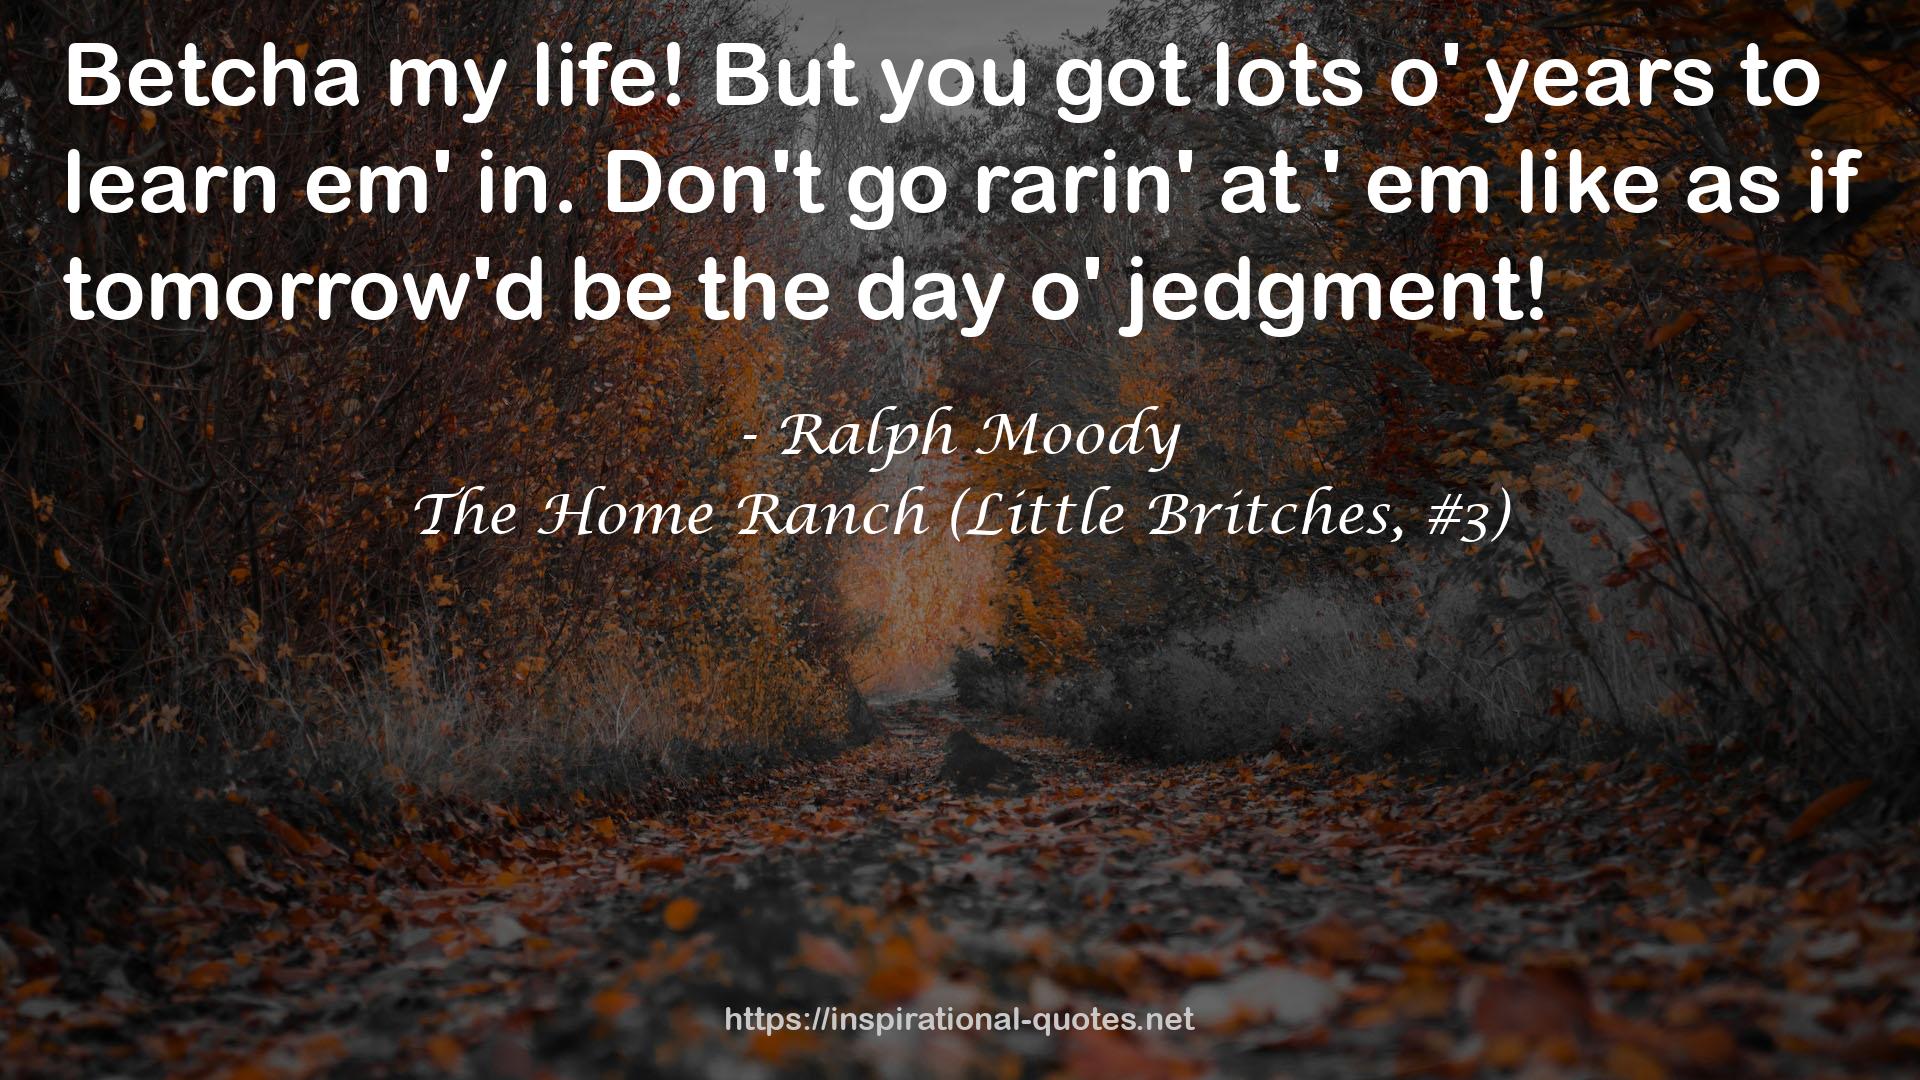 The Home Ranch (Little Britches, #3) QUOTES